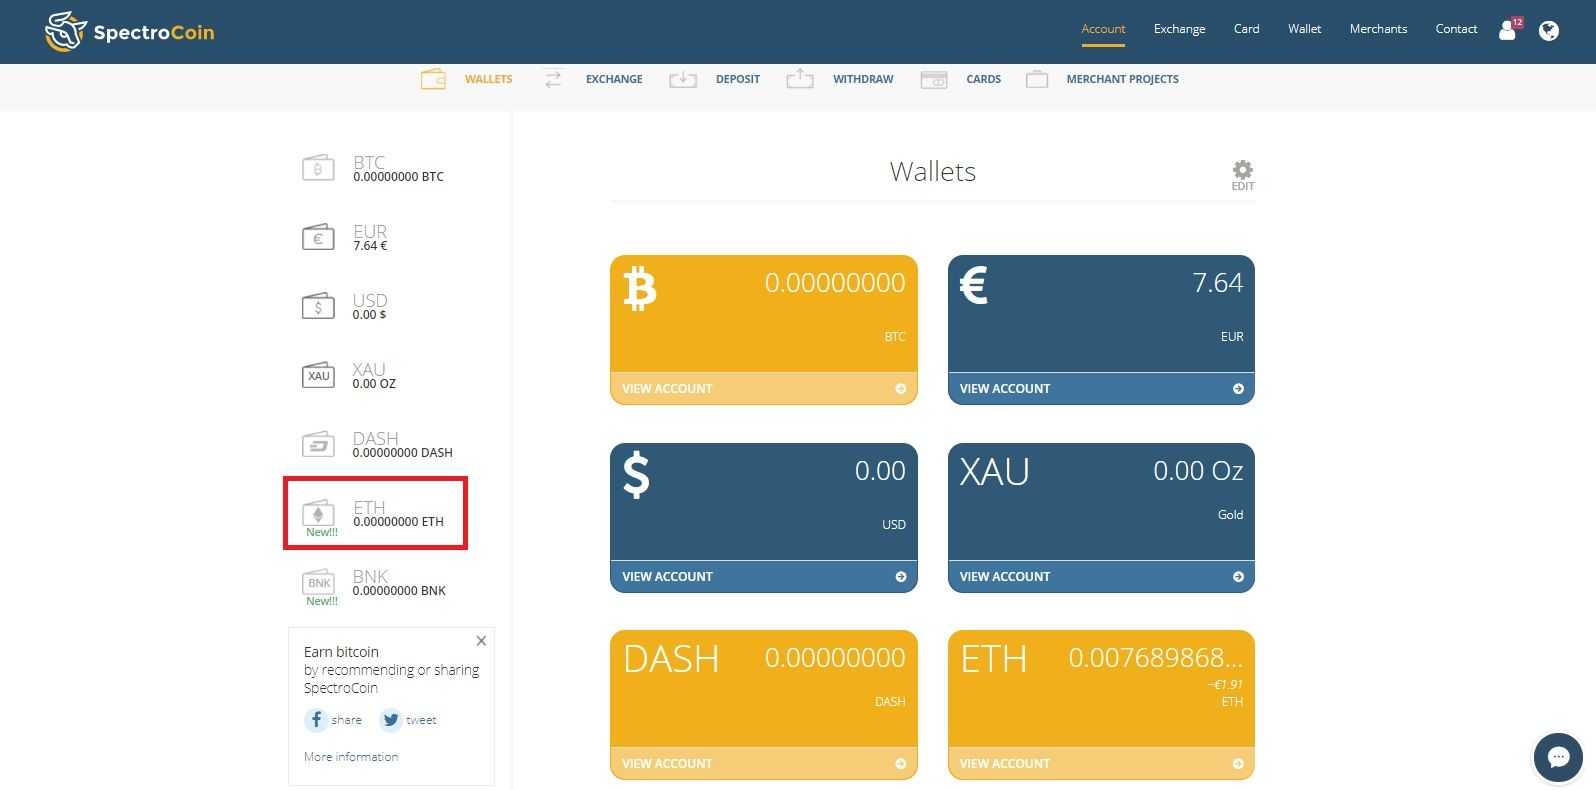 Screenshot of the account section with highlighted ETH wallet.